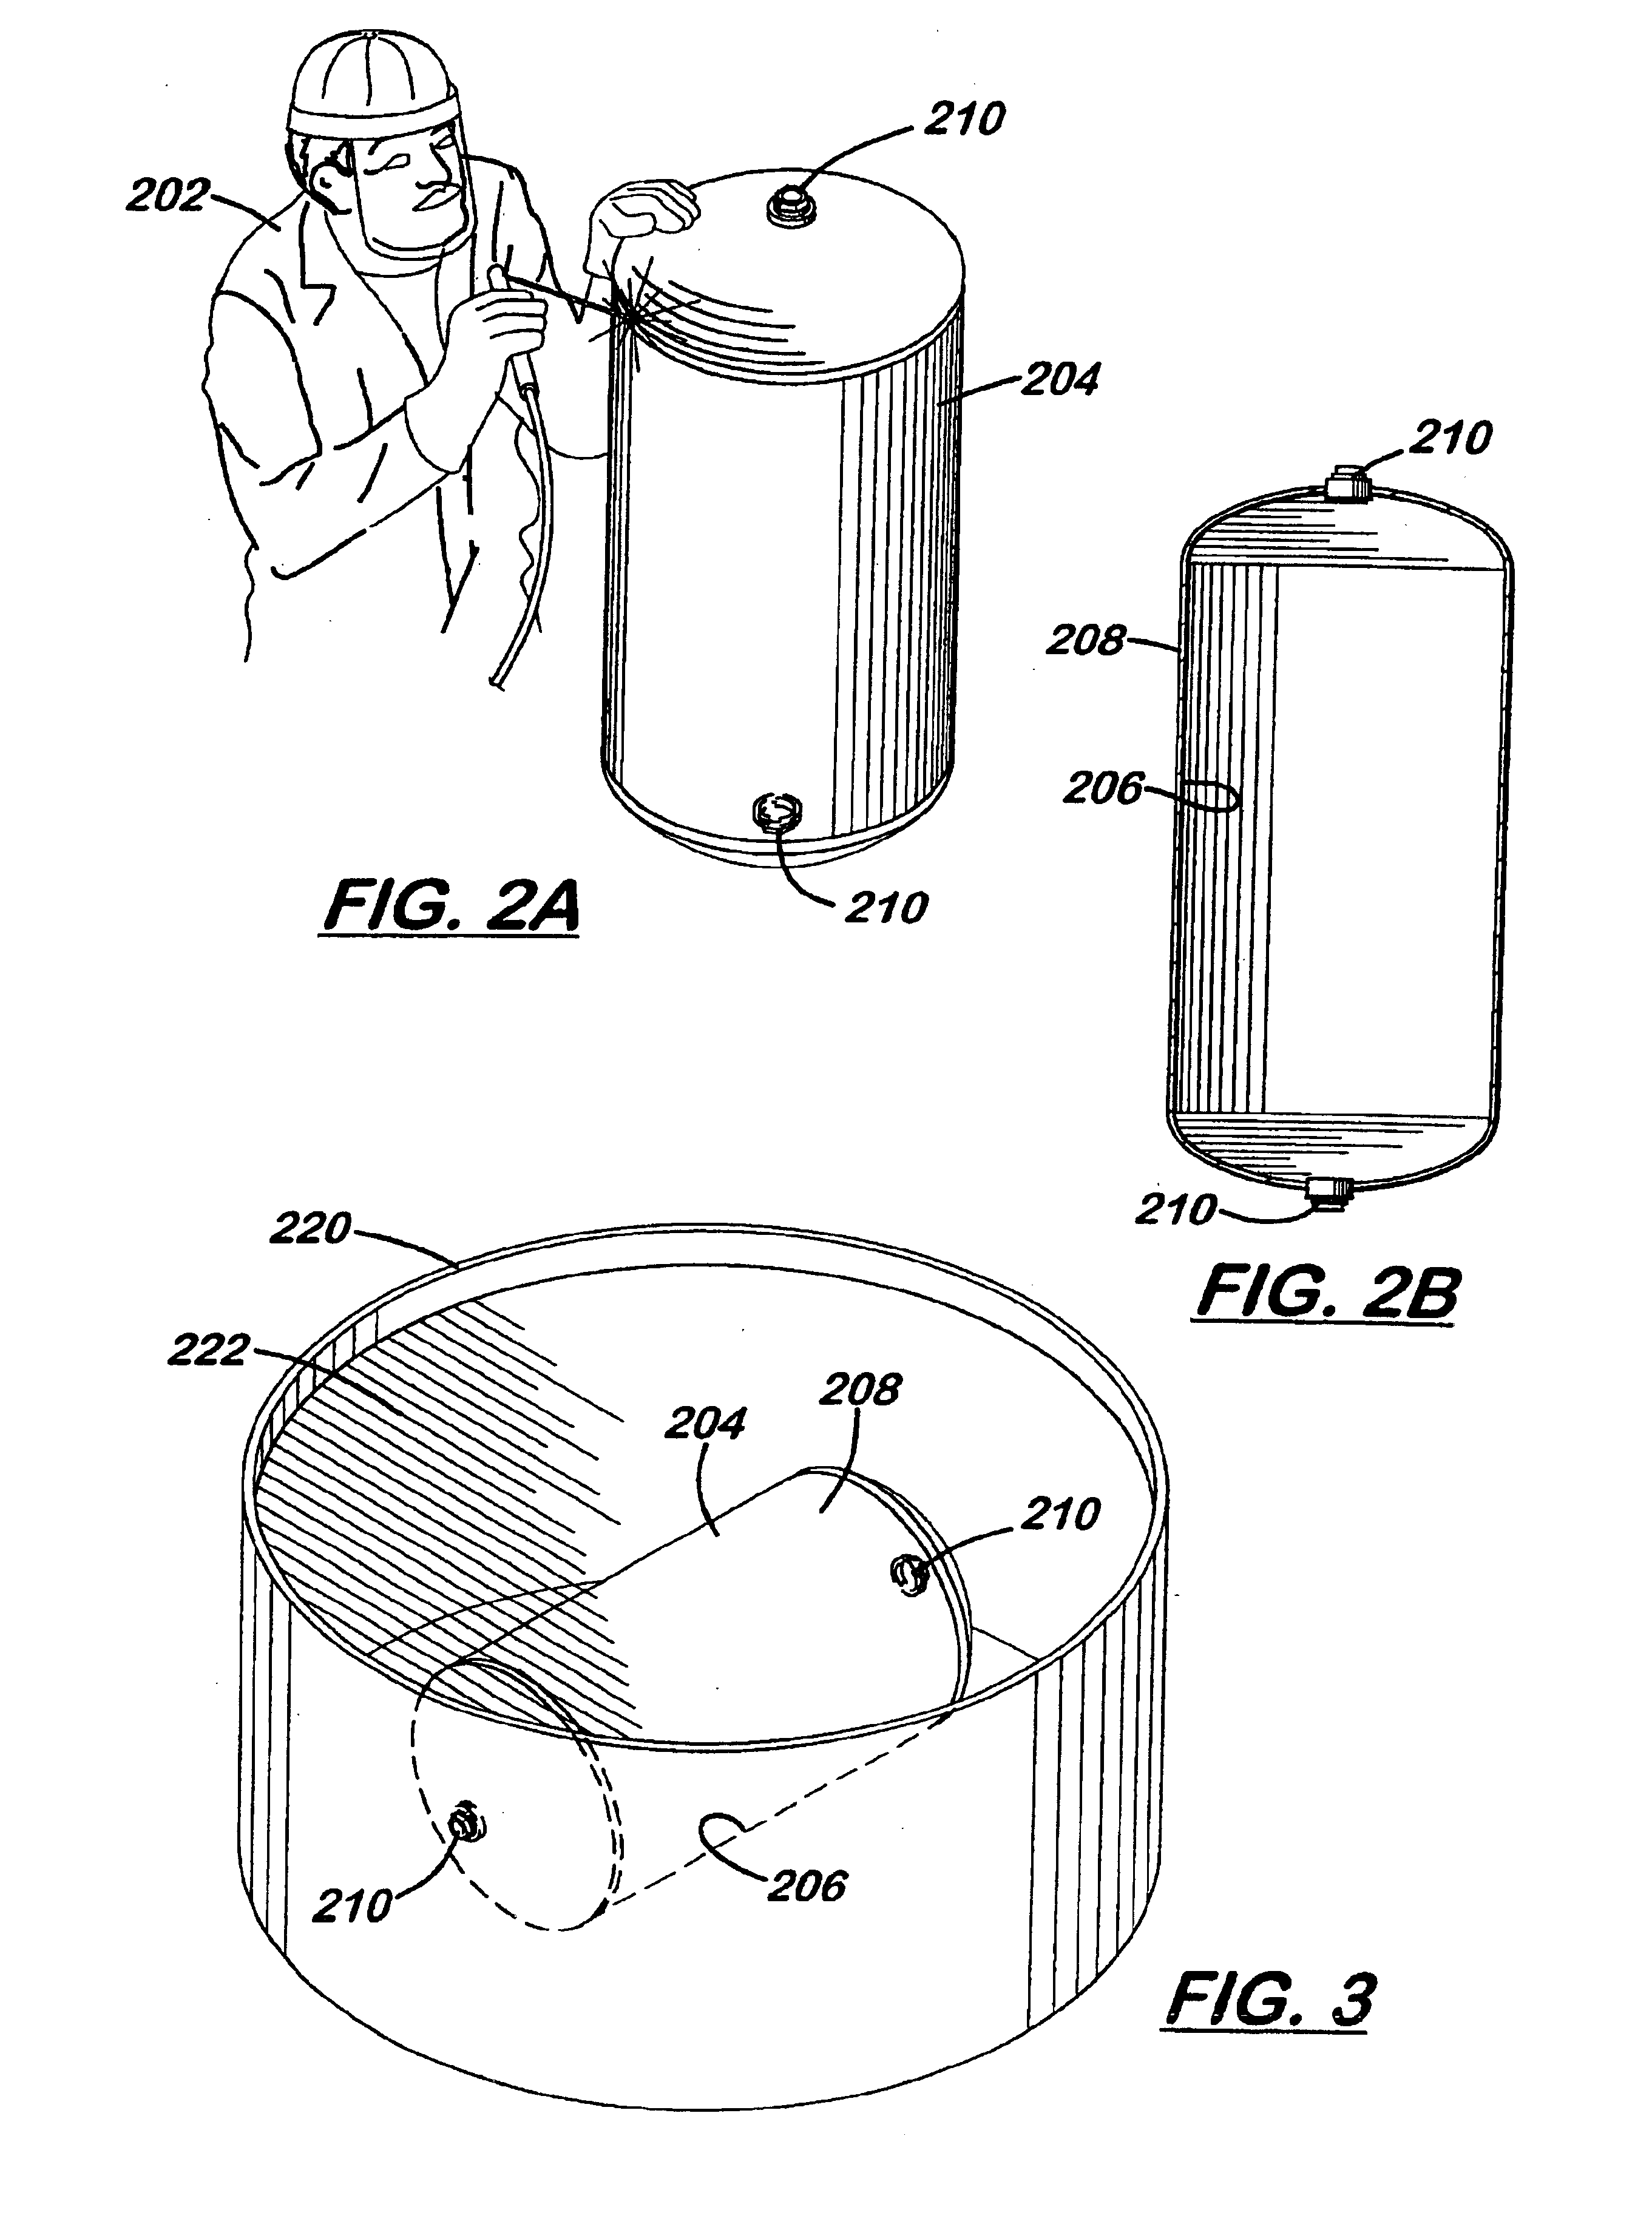 Method for manufacturing air compressor assembly